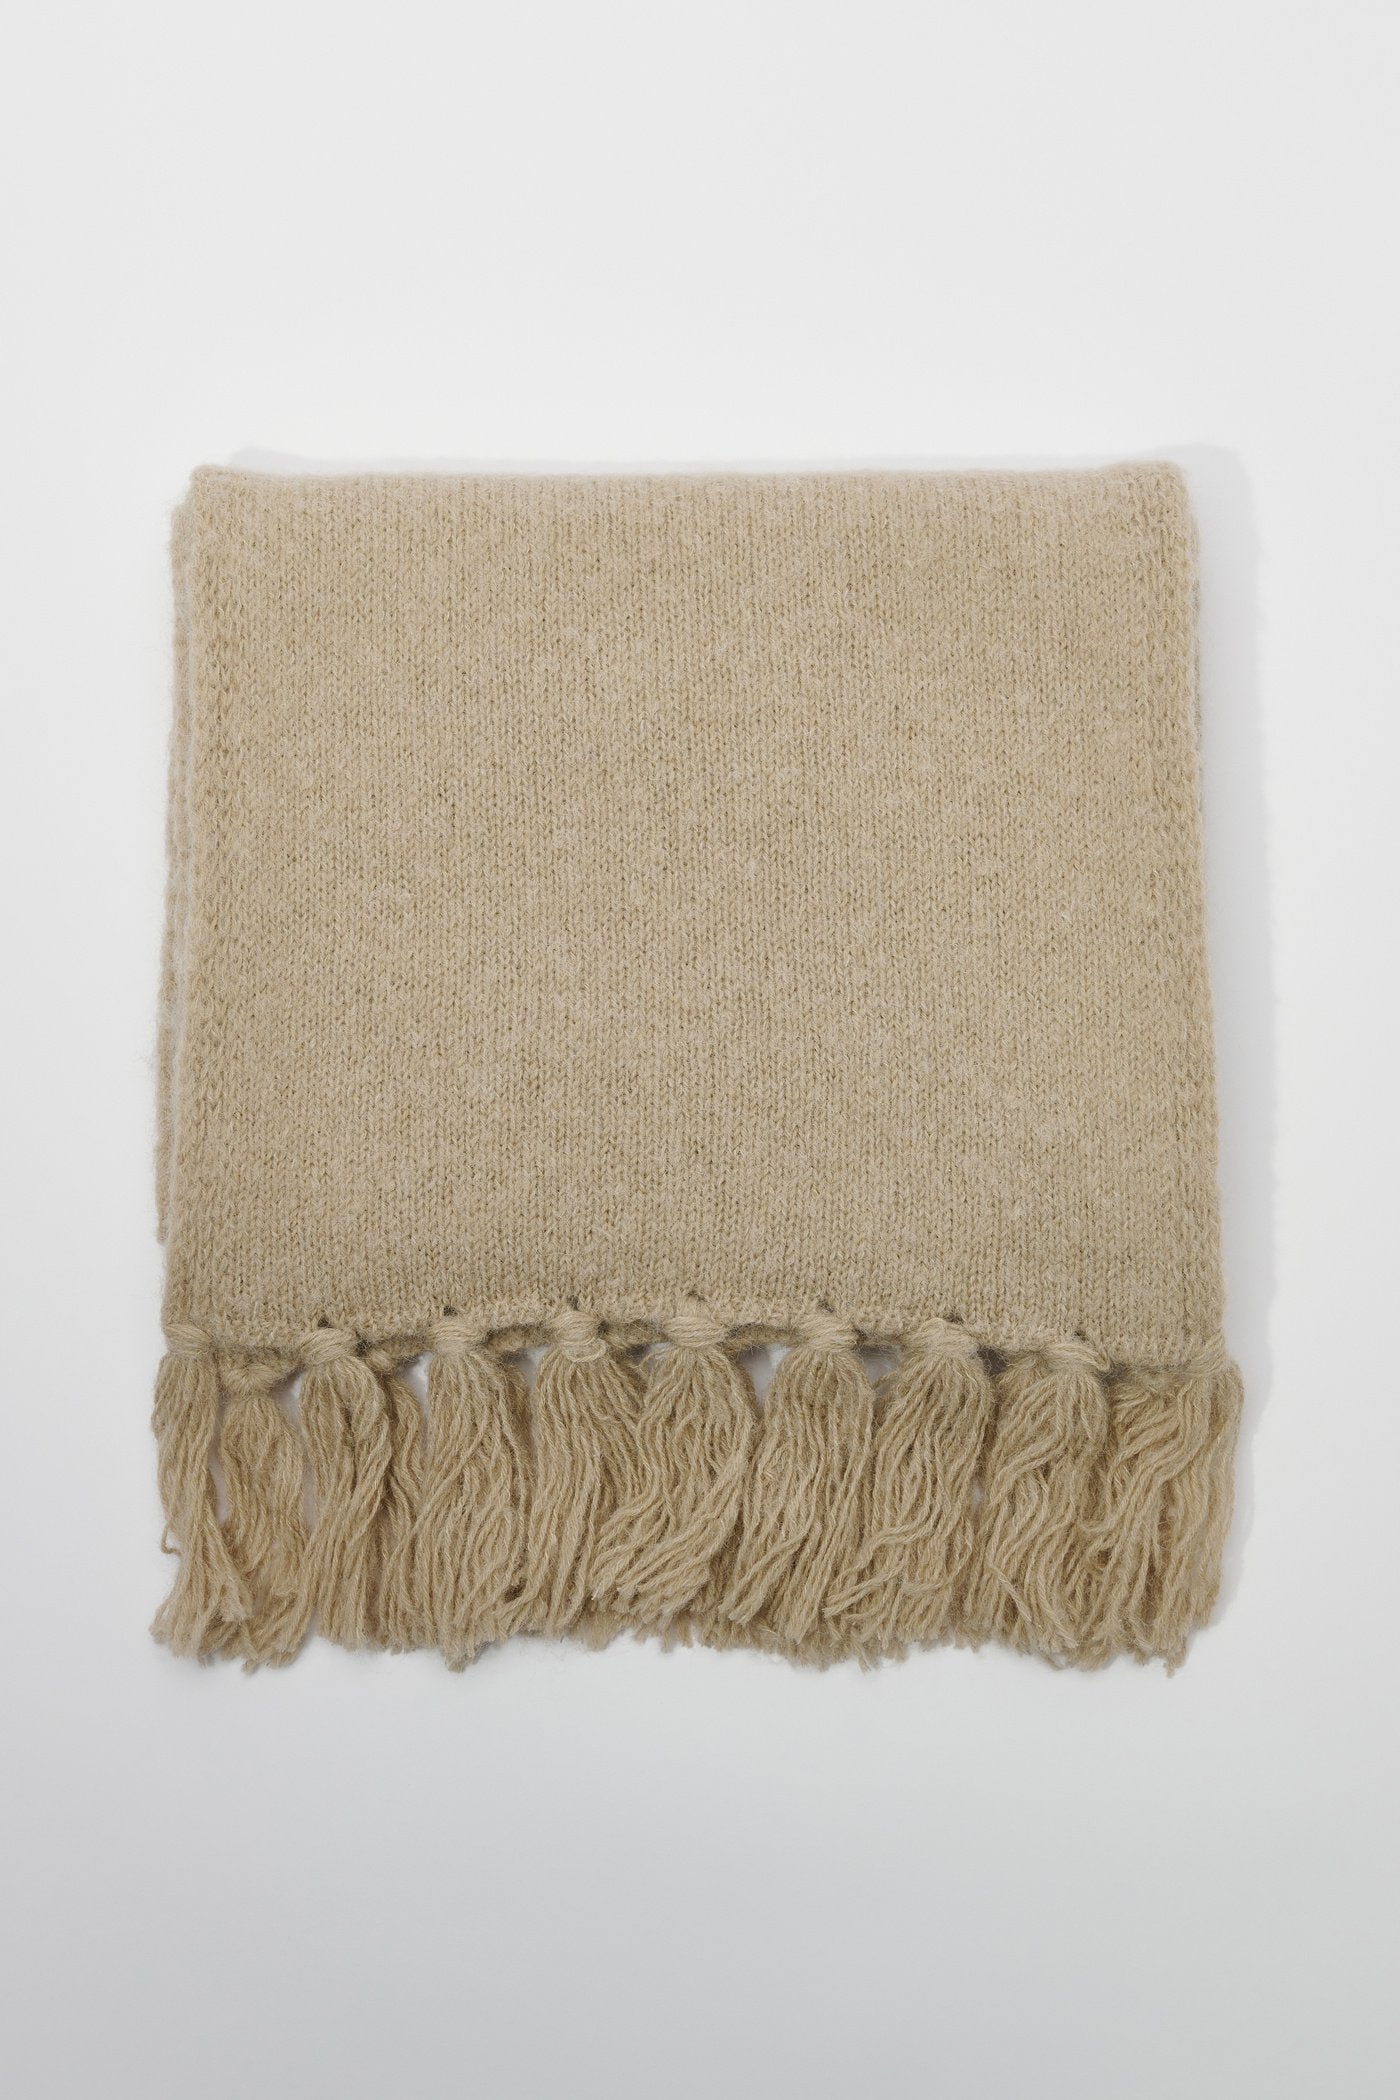 OUR LEGACY 「KNITTED SCARF DESERT SNOW SILK WOOL」 – SISTER